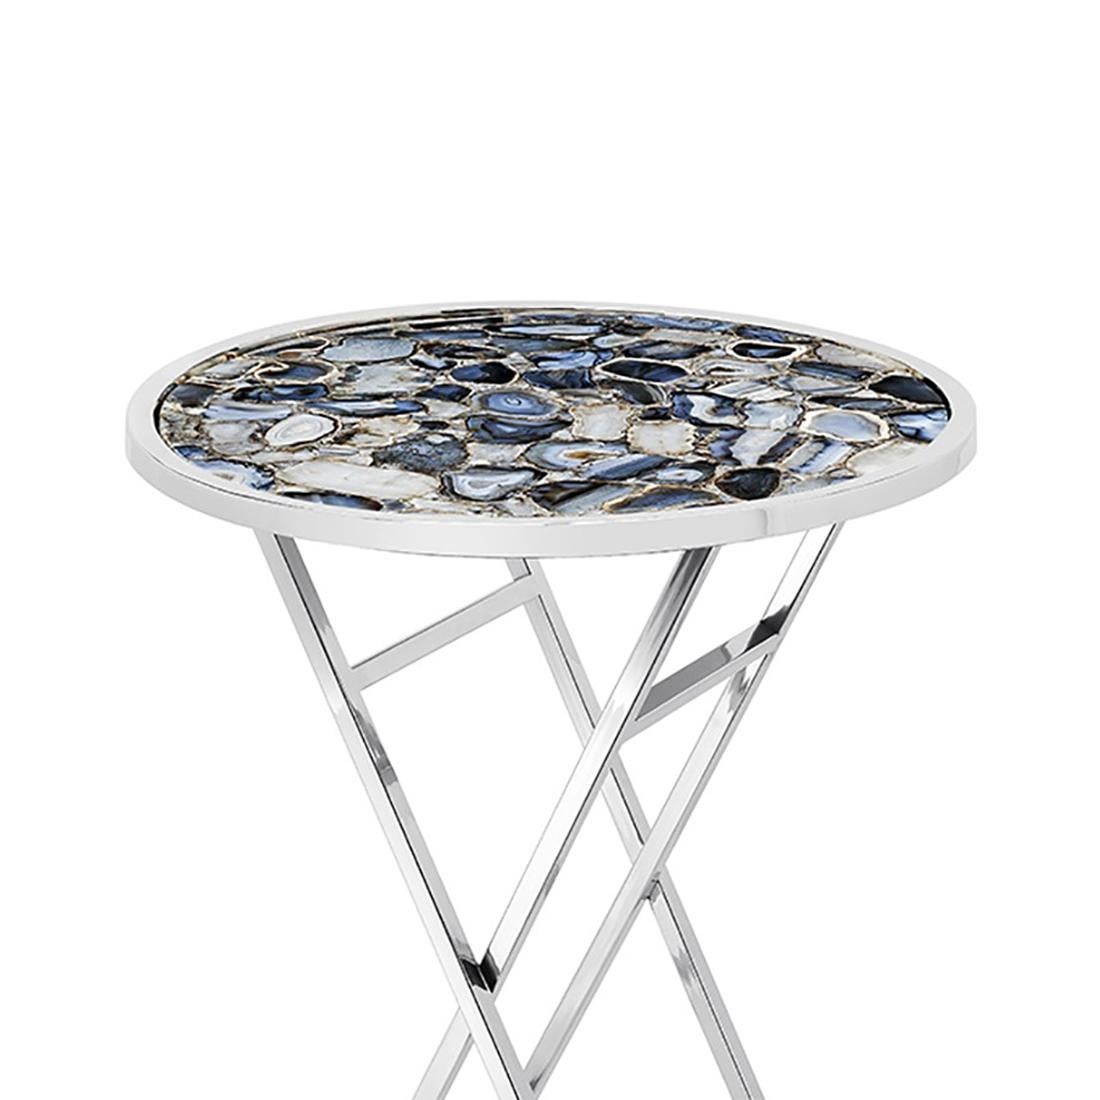 Side table Agate blue with real agate stone top
with polished stainless steel top frame. On polished
stainless steel base (non foldable base).